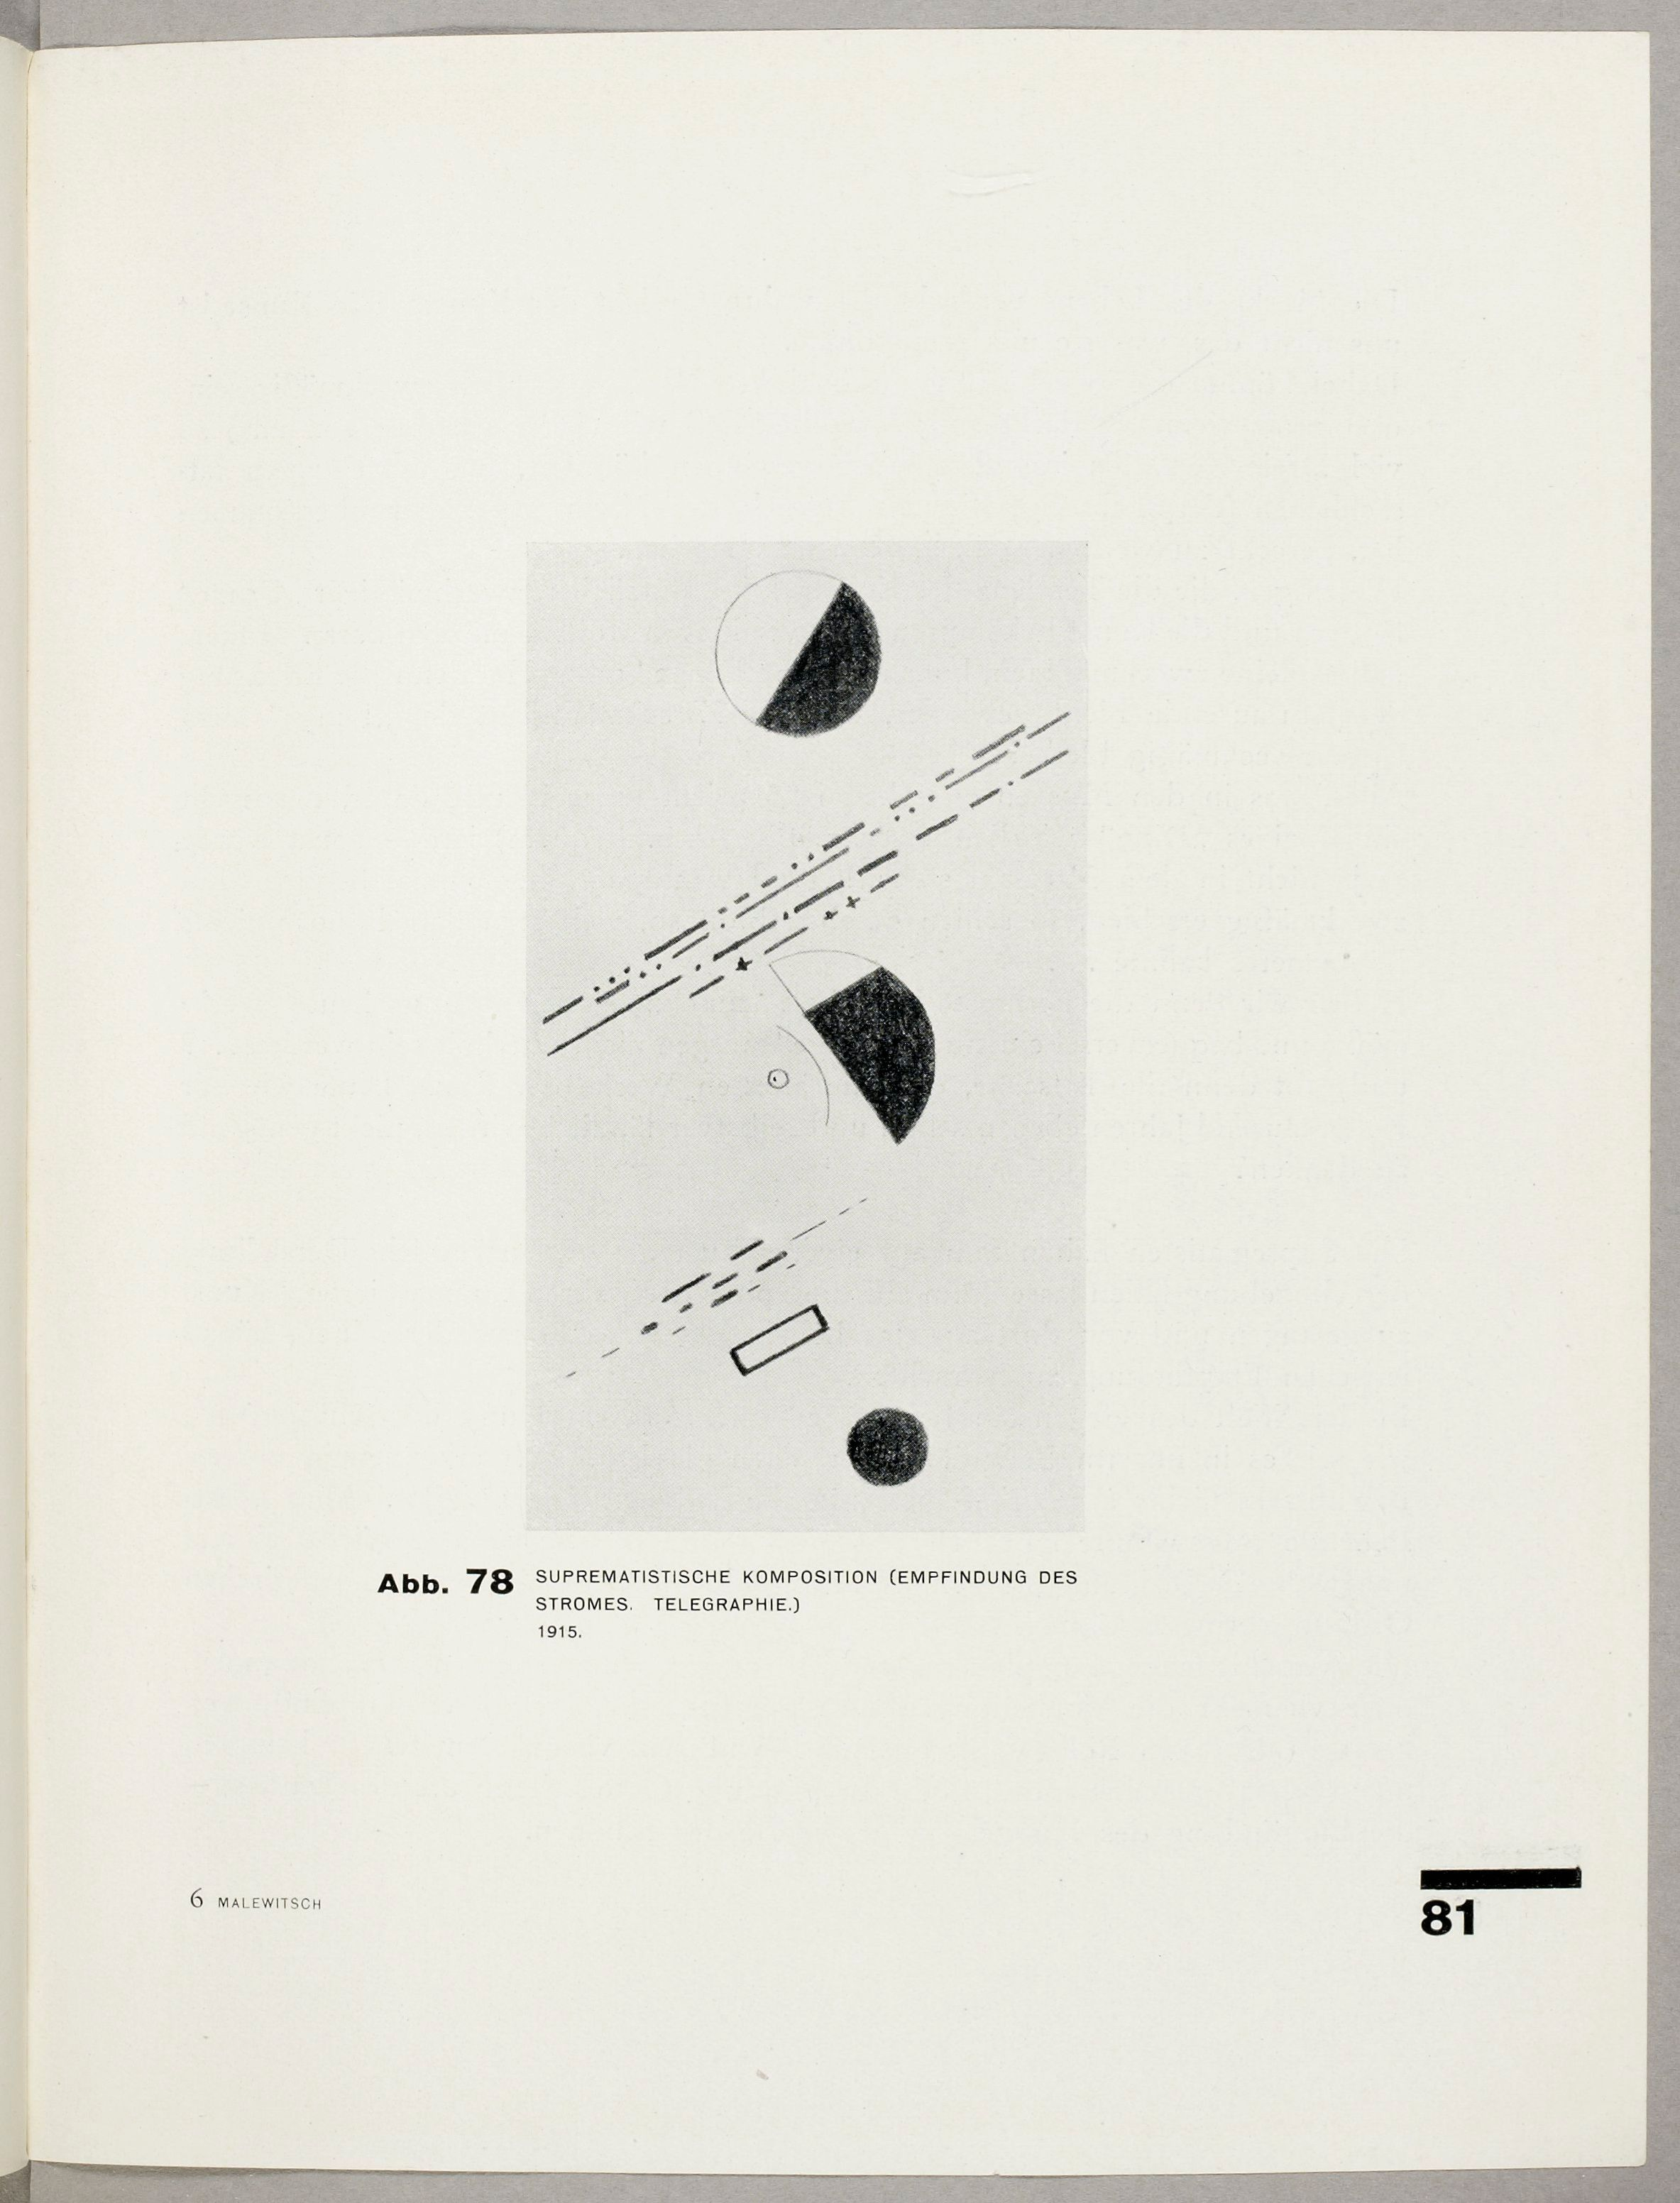 Suprematistic composition (Feeling of the current. Telegraphy.) (1927).